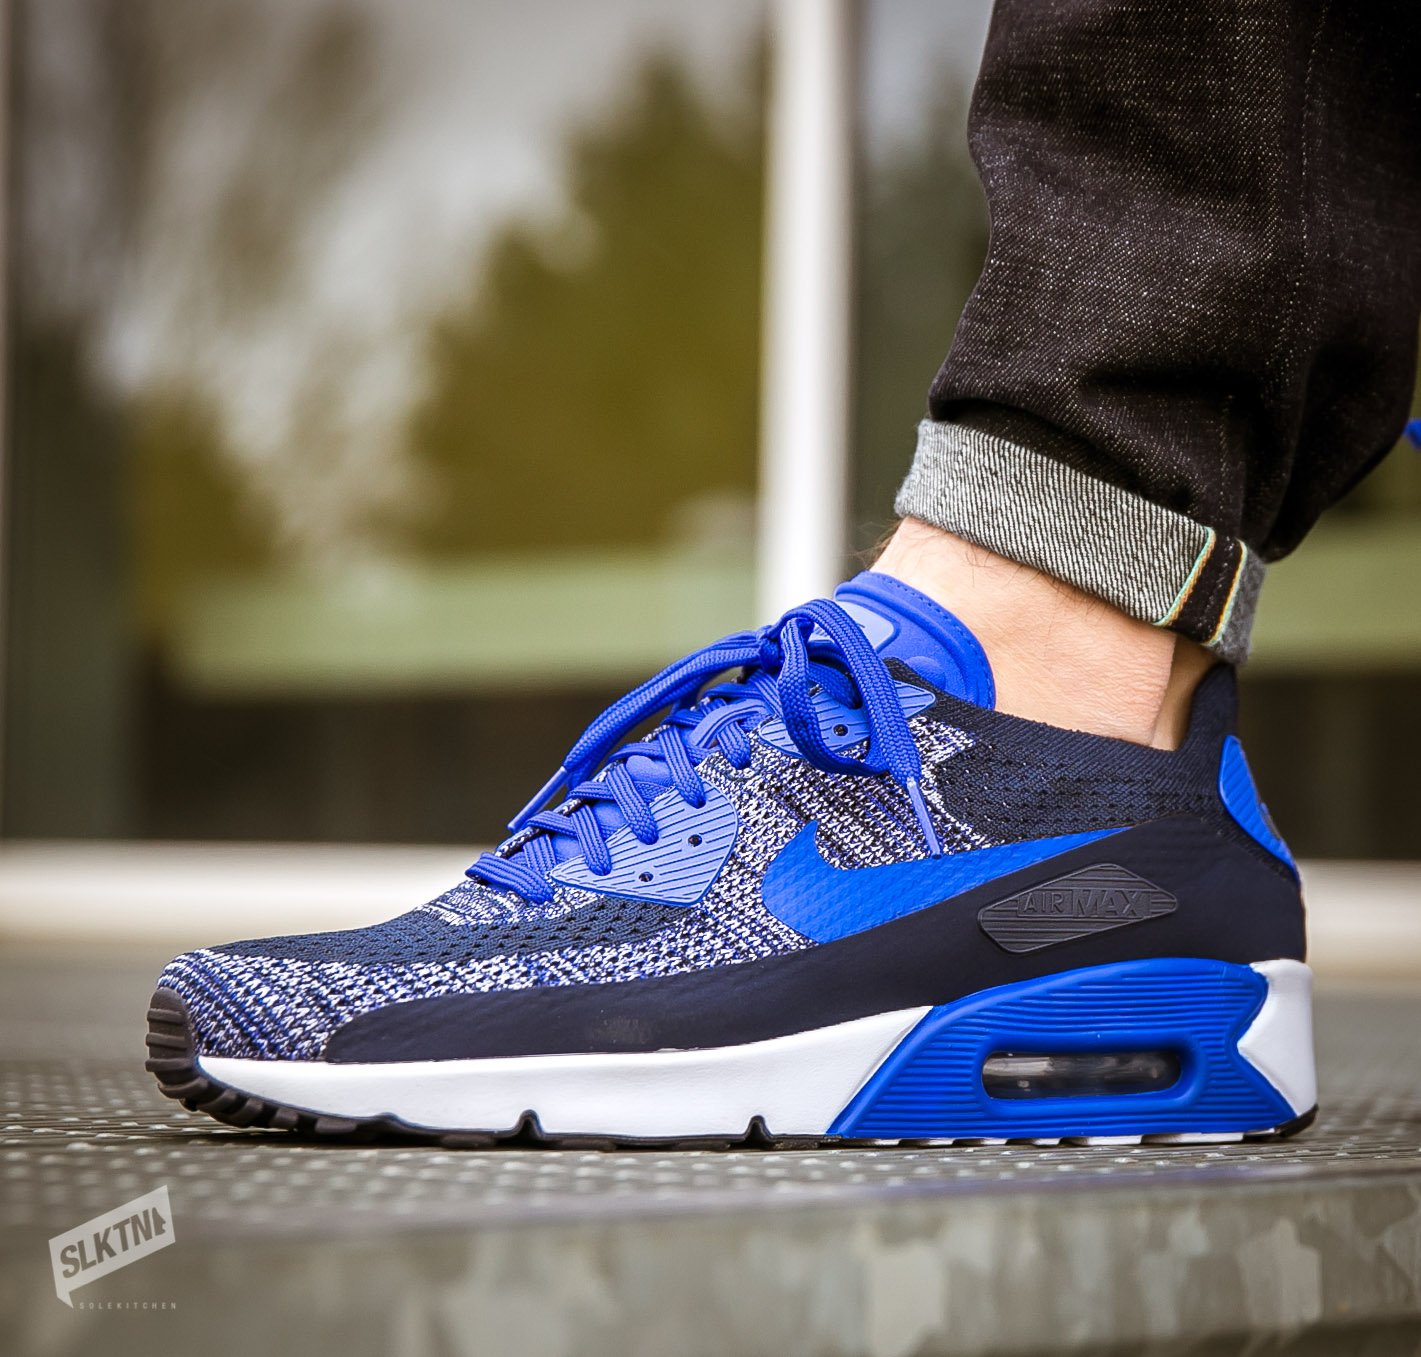 Nike Air Max 90 Ultra 2.0 "College Navy"